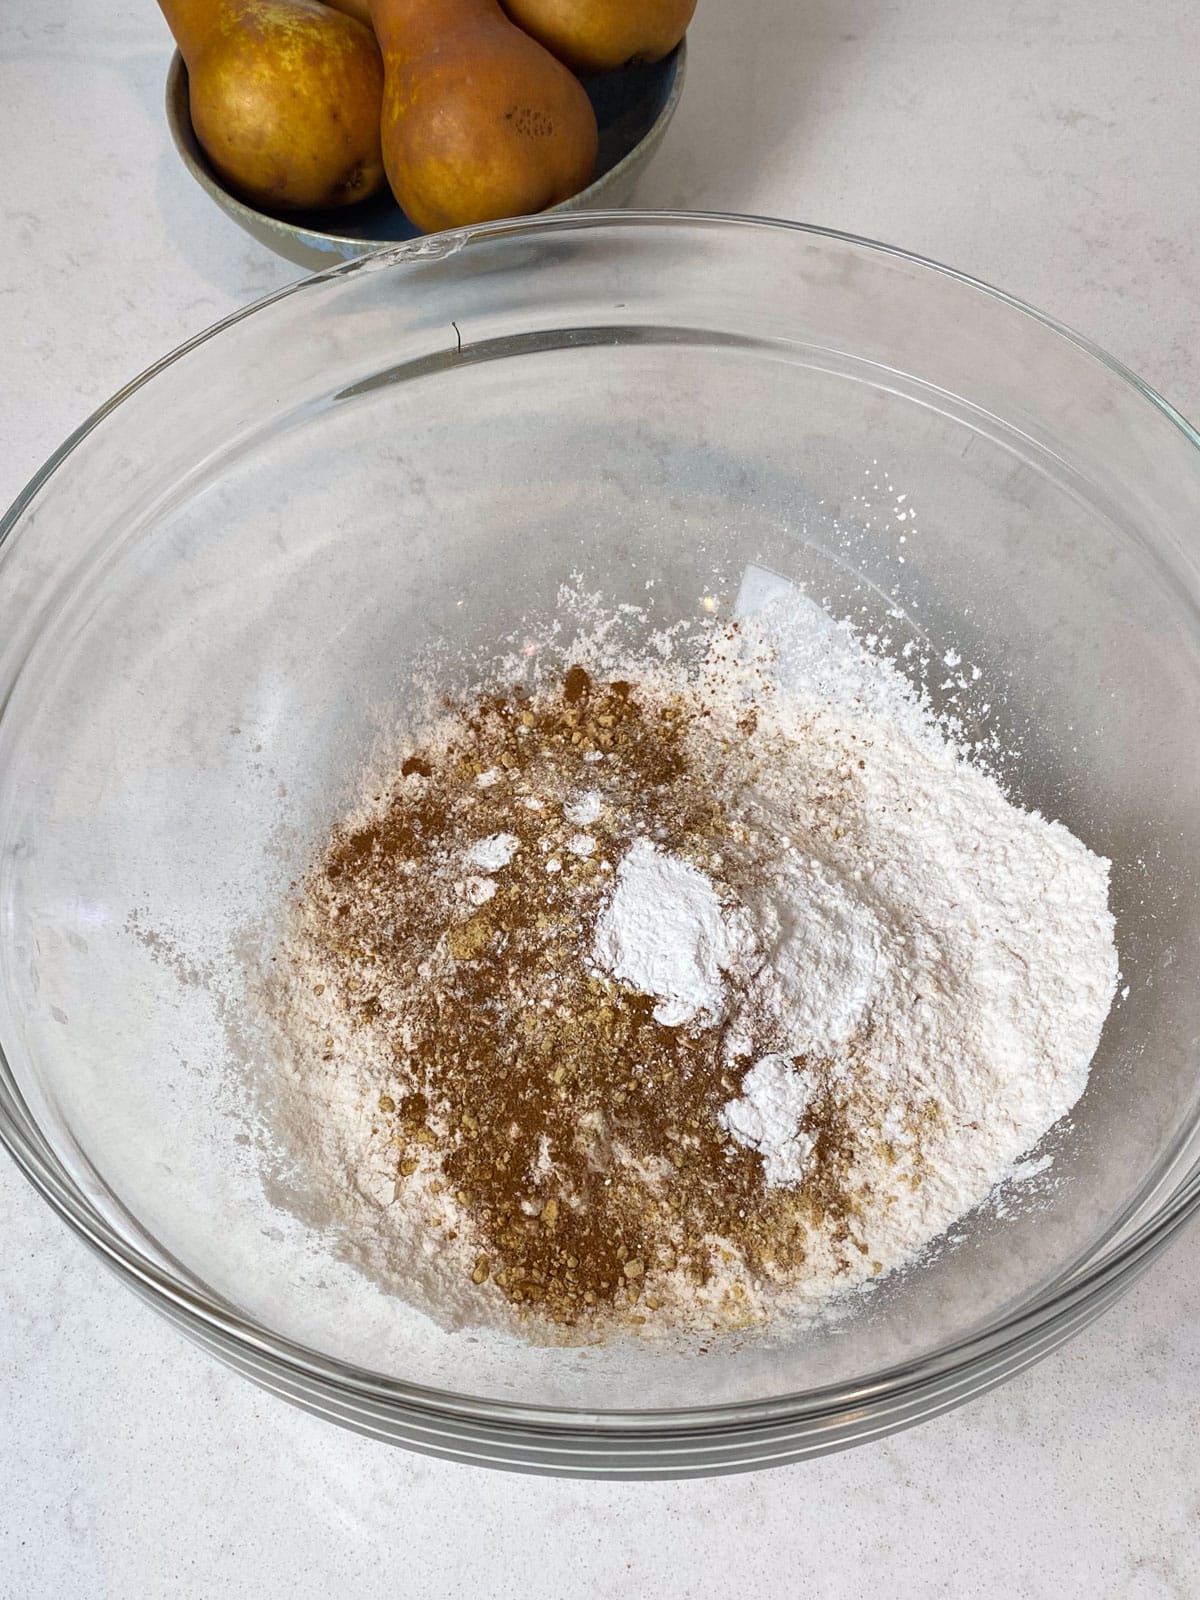 Whisk the dry ingredients together, the flour, baking powder and spices.